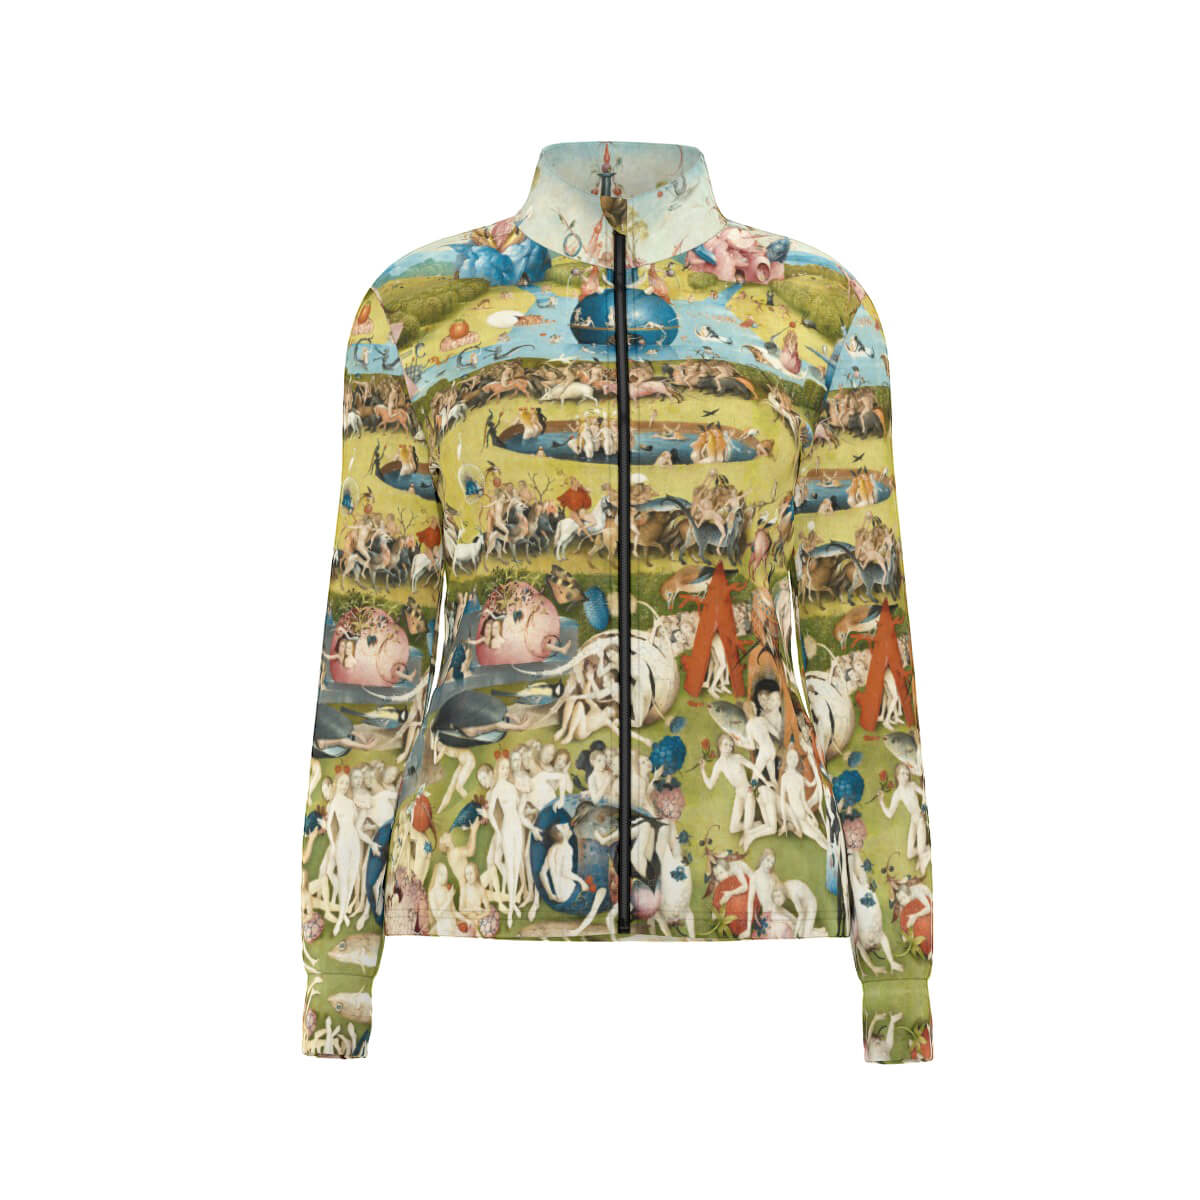 Hieronymus Bosch Earthly Delights Women's Jacket